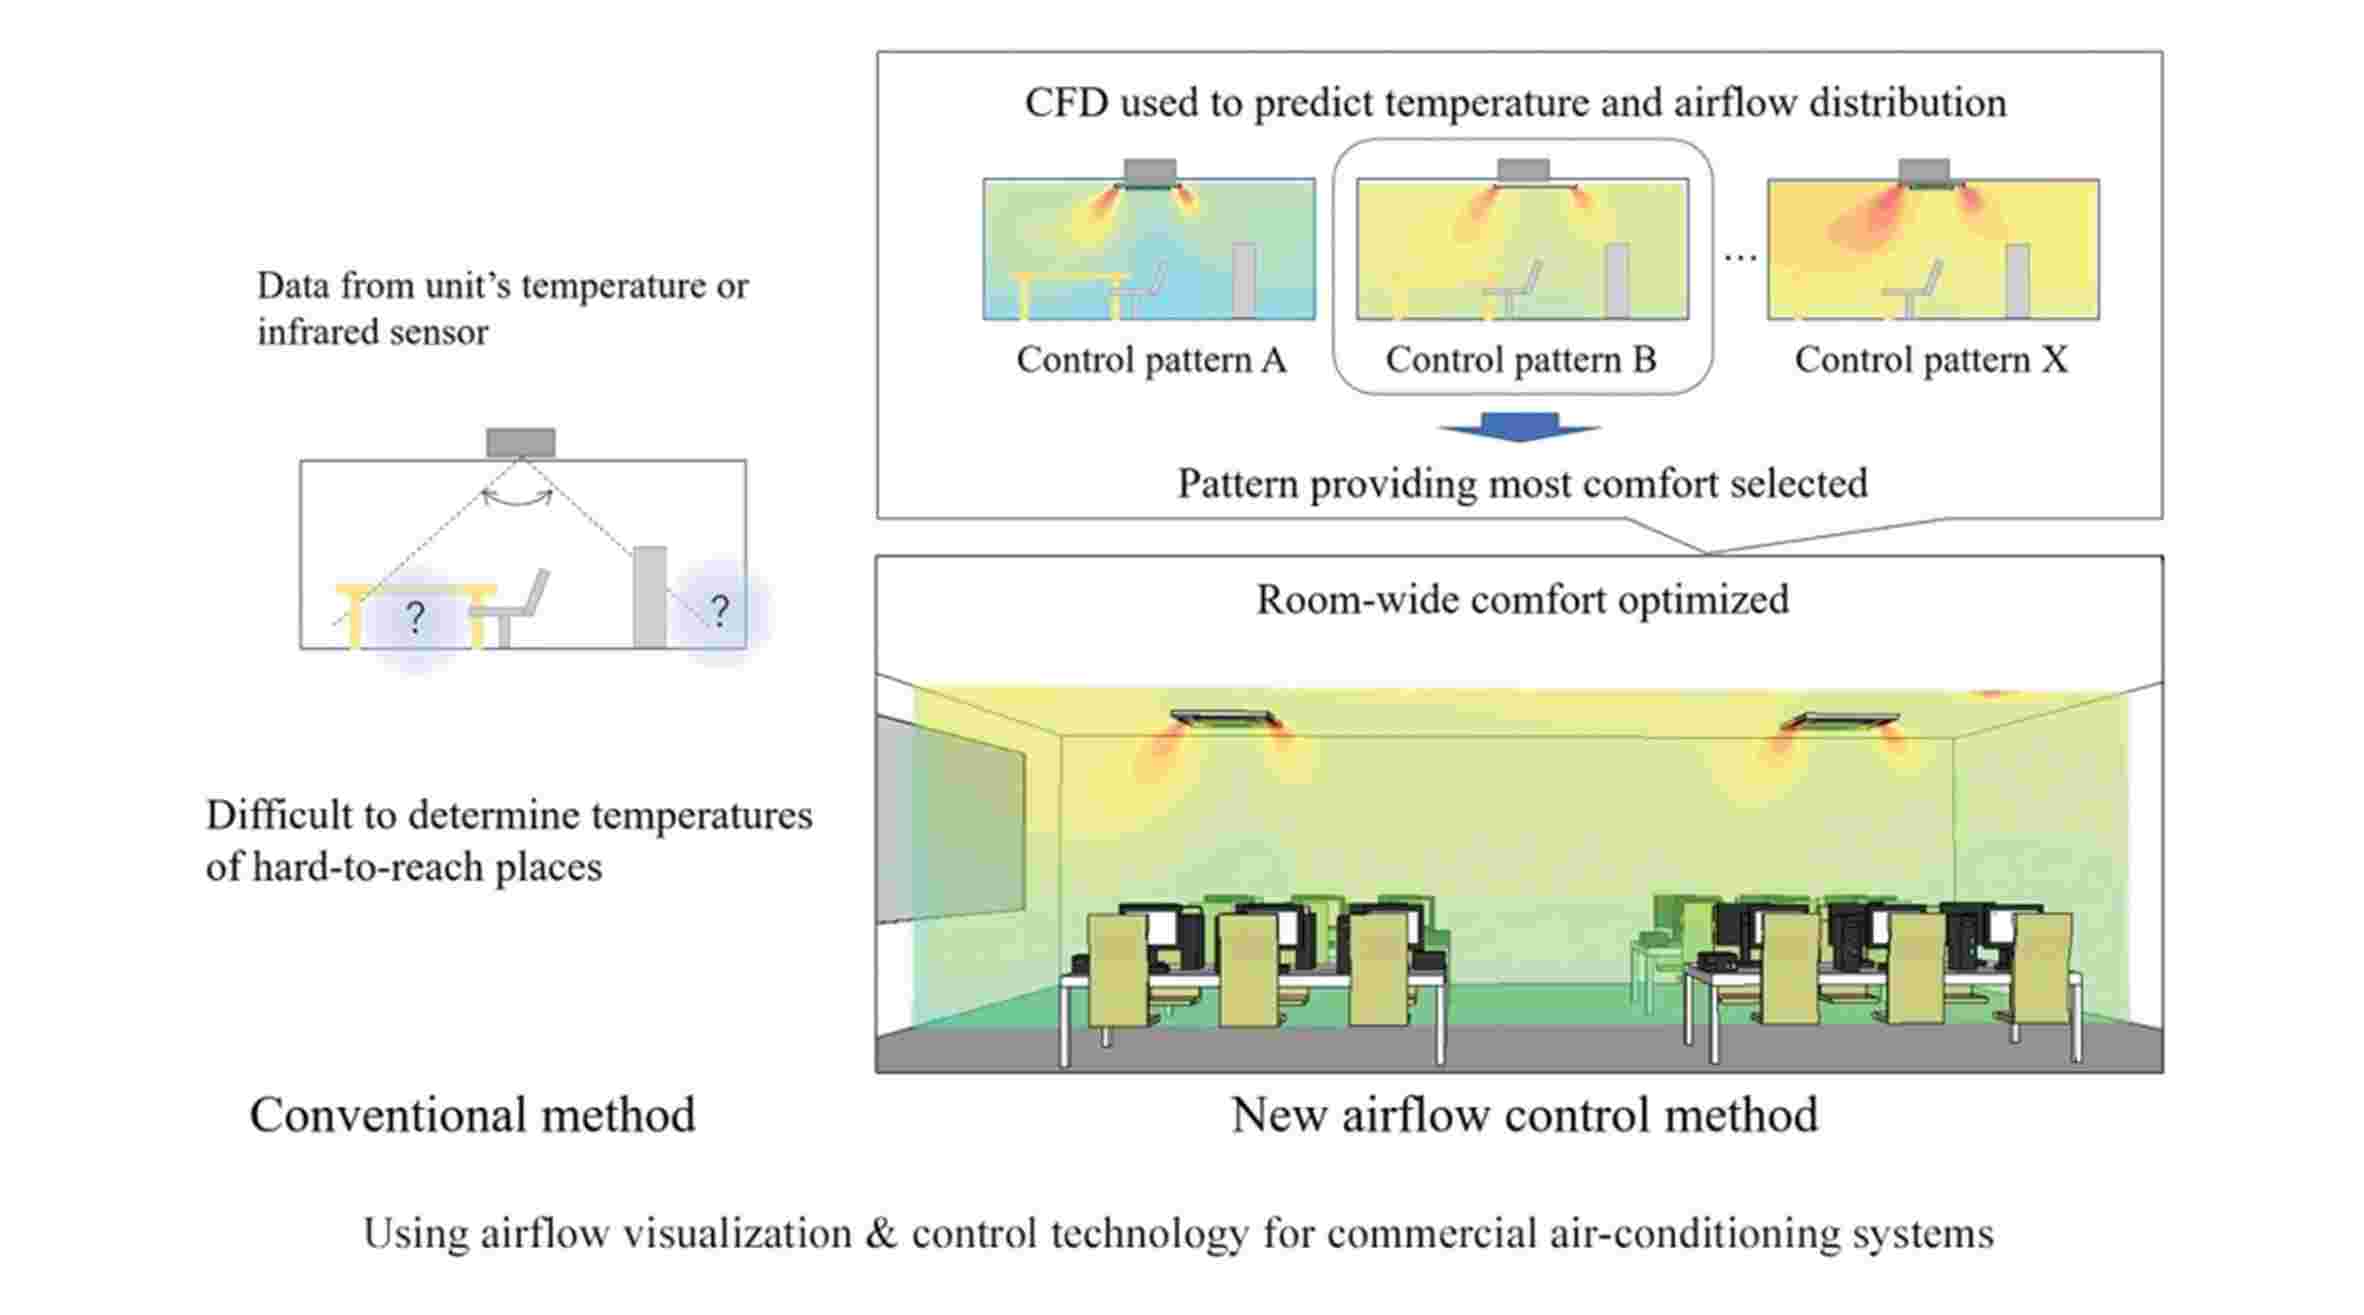 Airflow visualization & control technology for commercial AC Systems  developed, Thermal Control Business Update